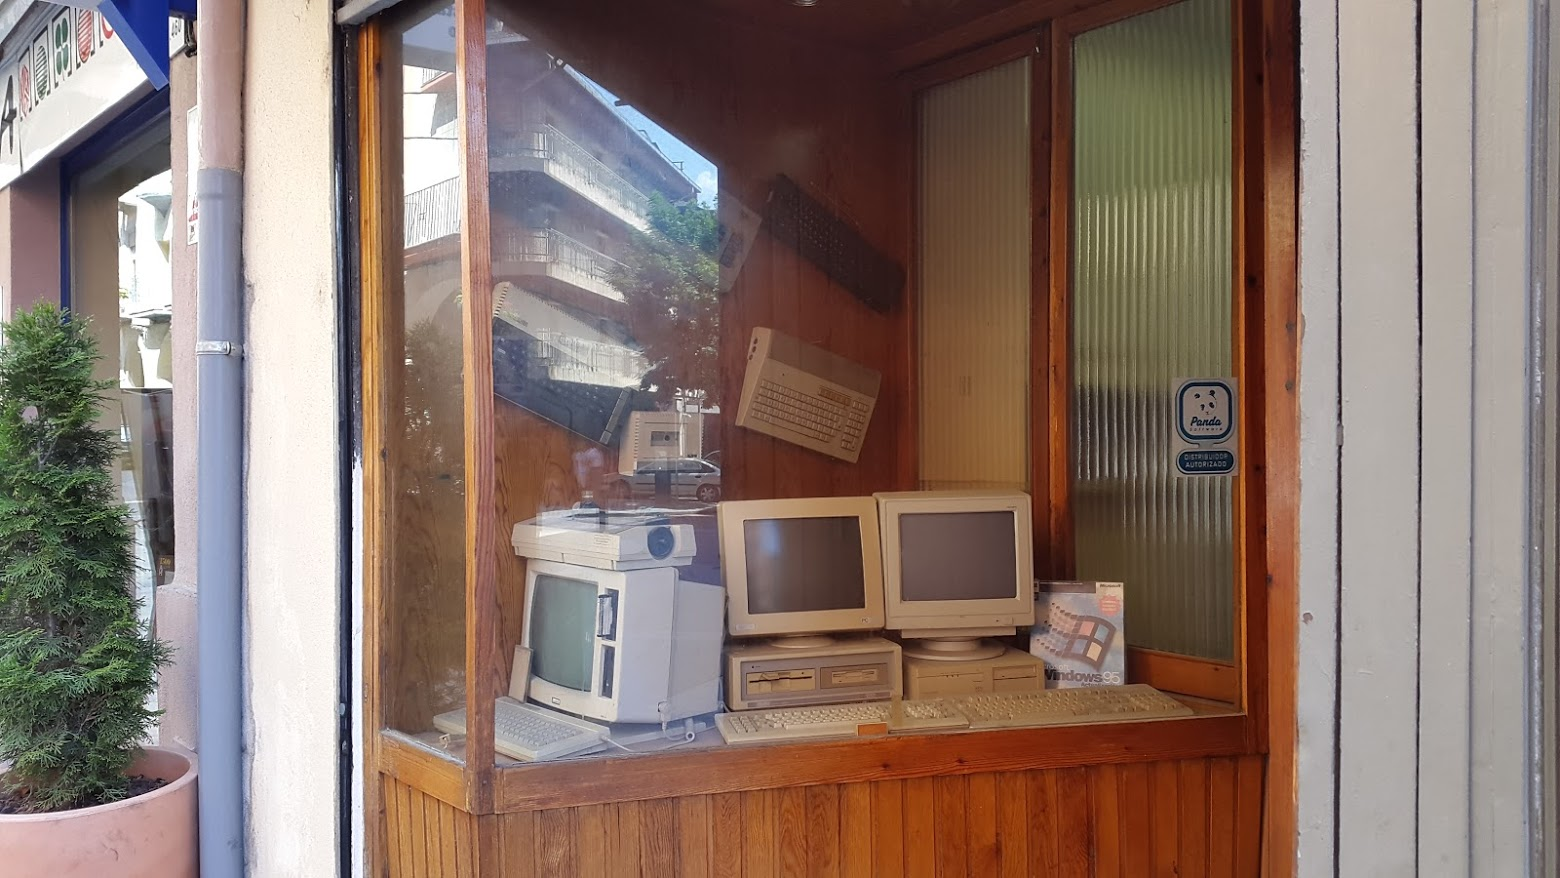 Don’t laugh at the ”Windows 95”...those PCs are much older :)